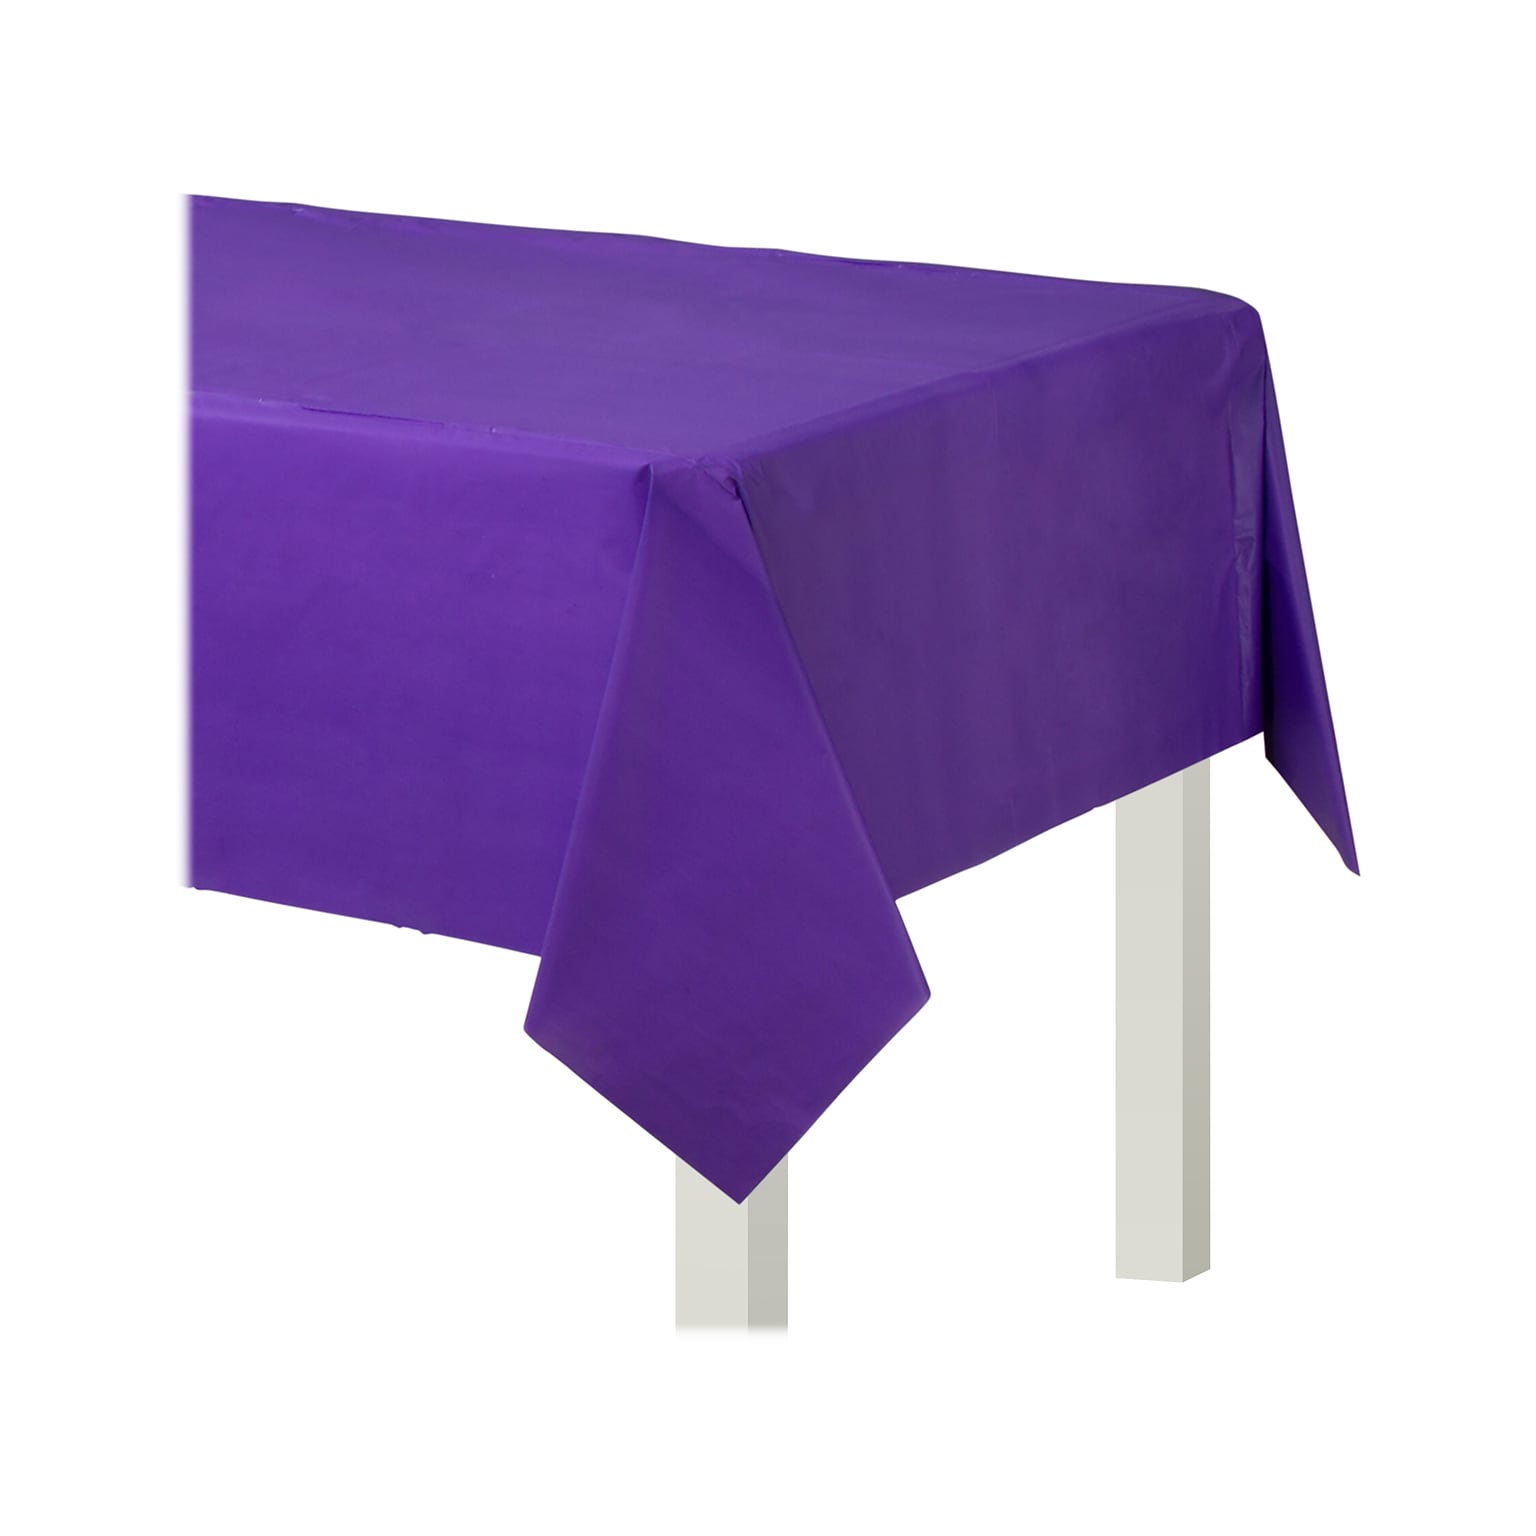 Amscan Party Table Cover, New Purple, 2/Pack (579592.106)